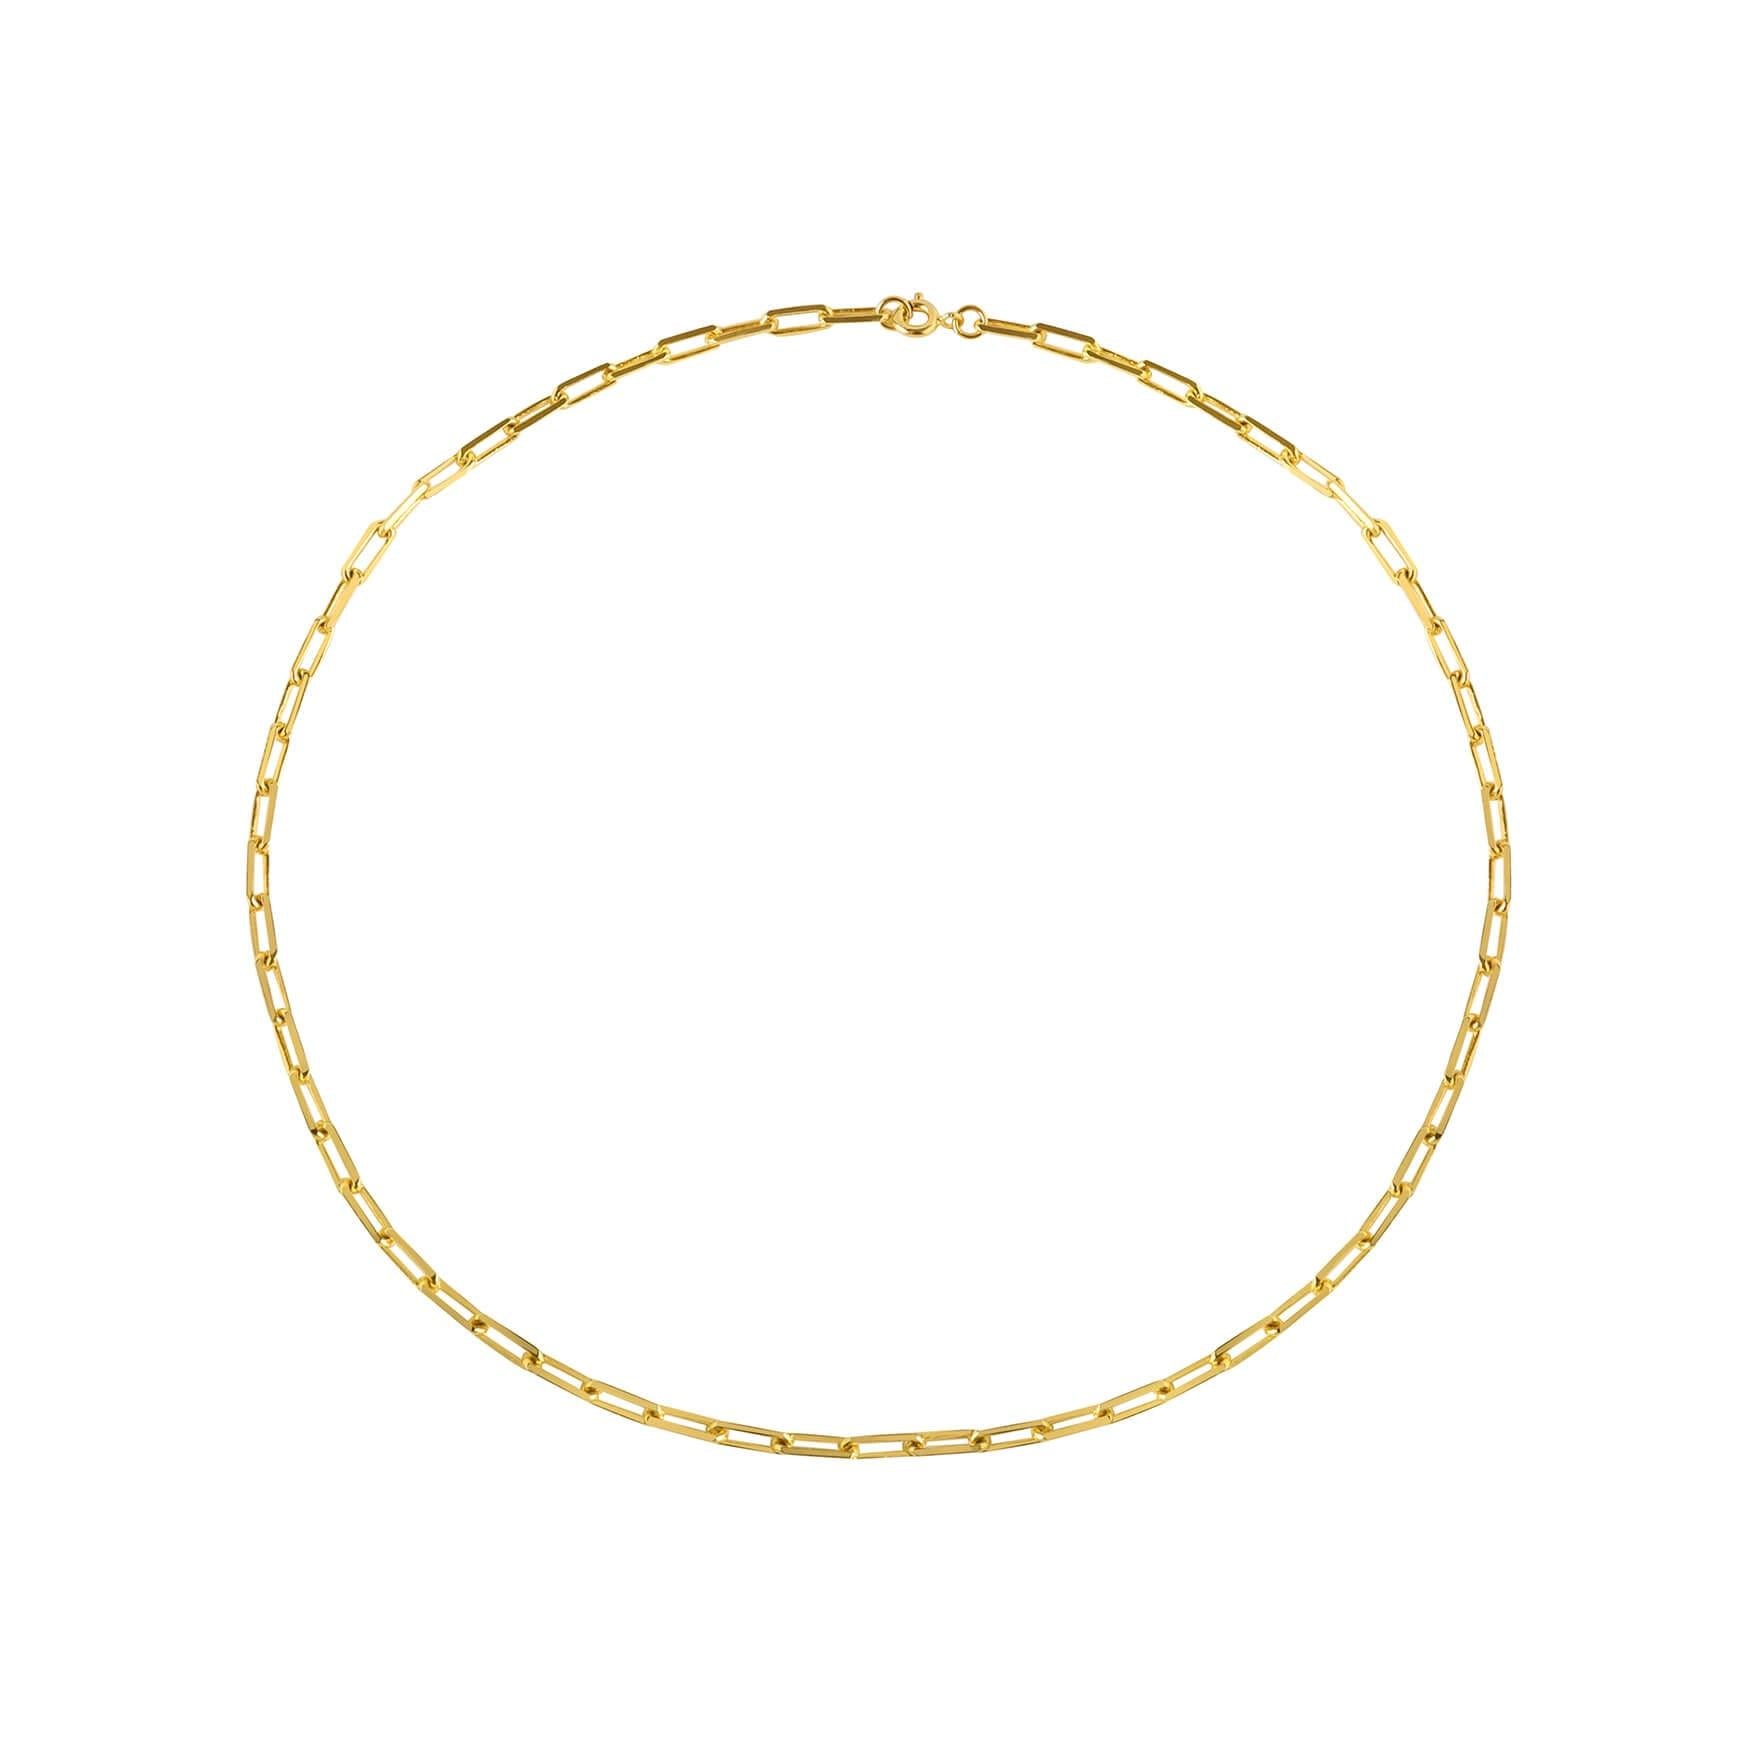 Gold Plated Necklace Long Link